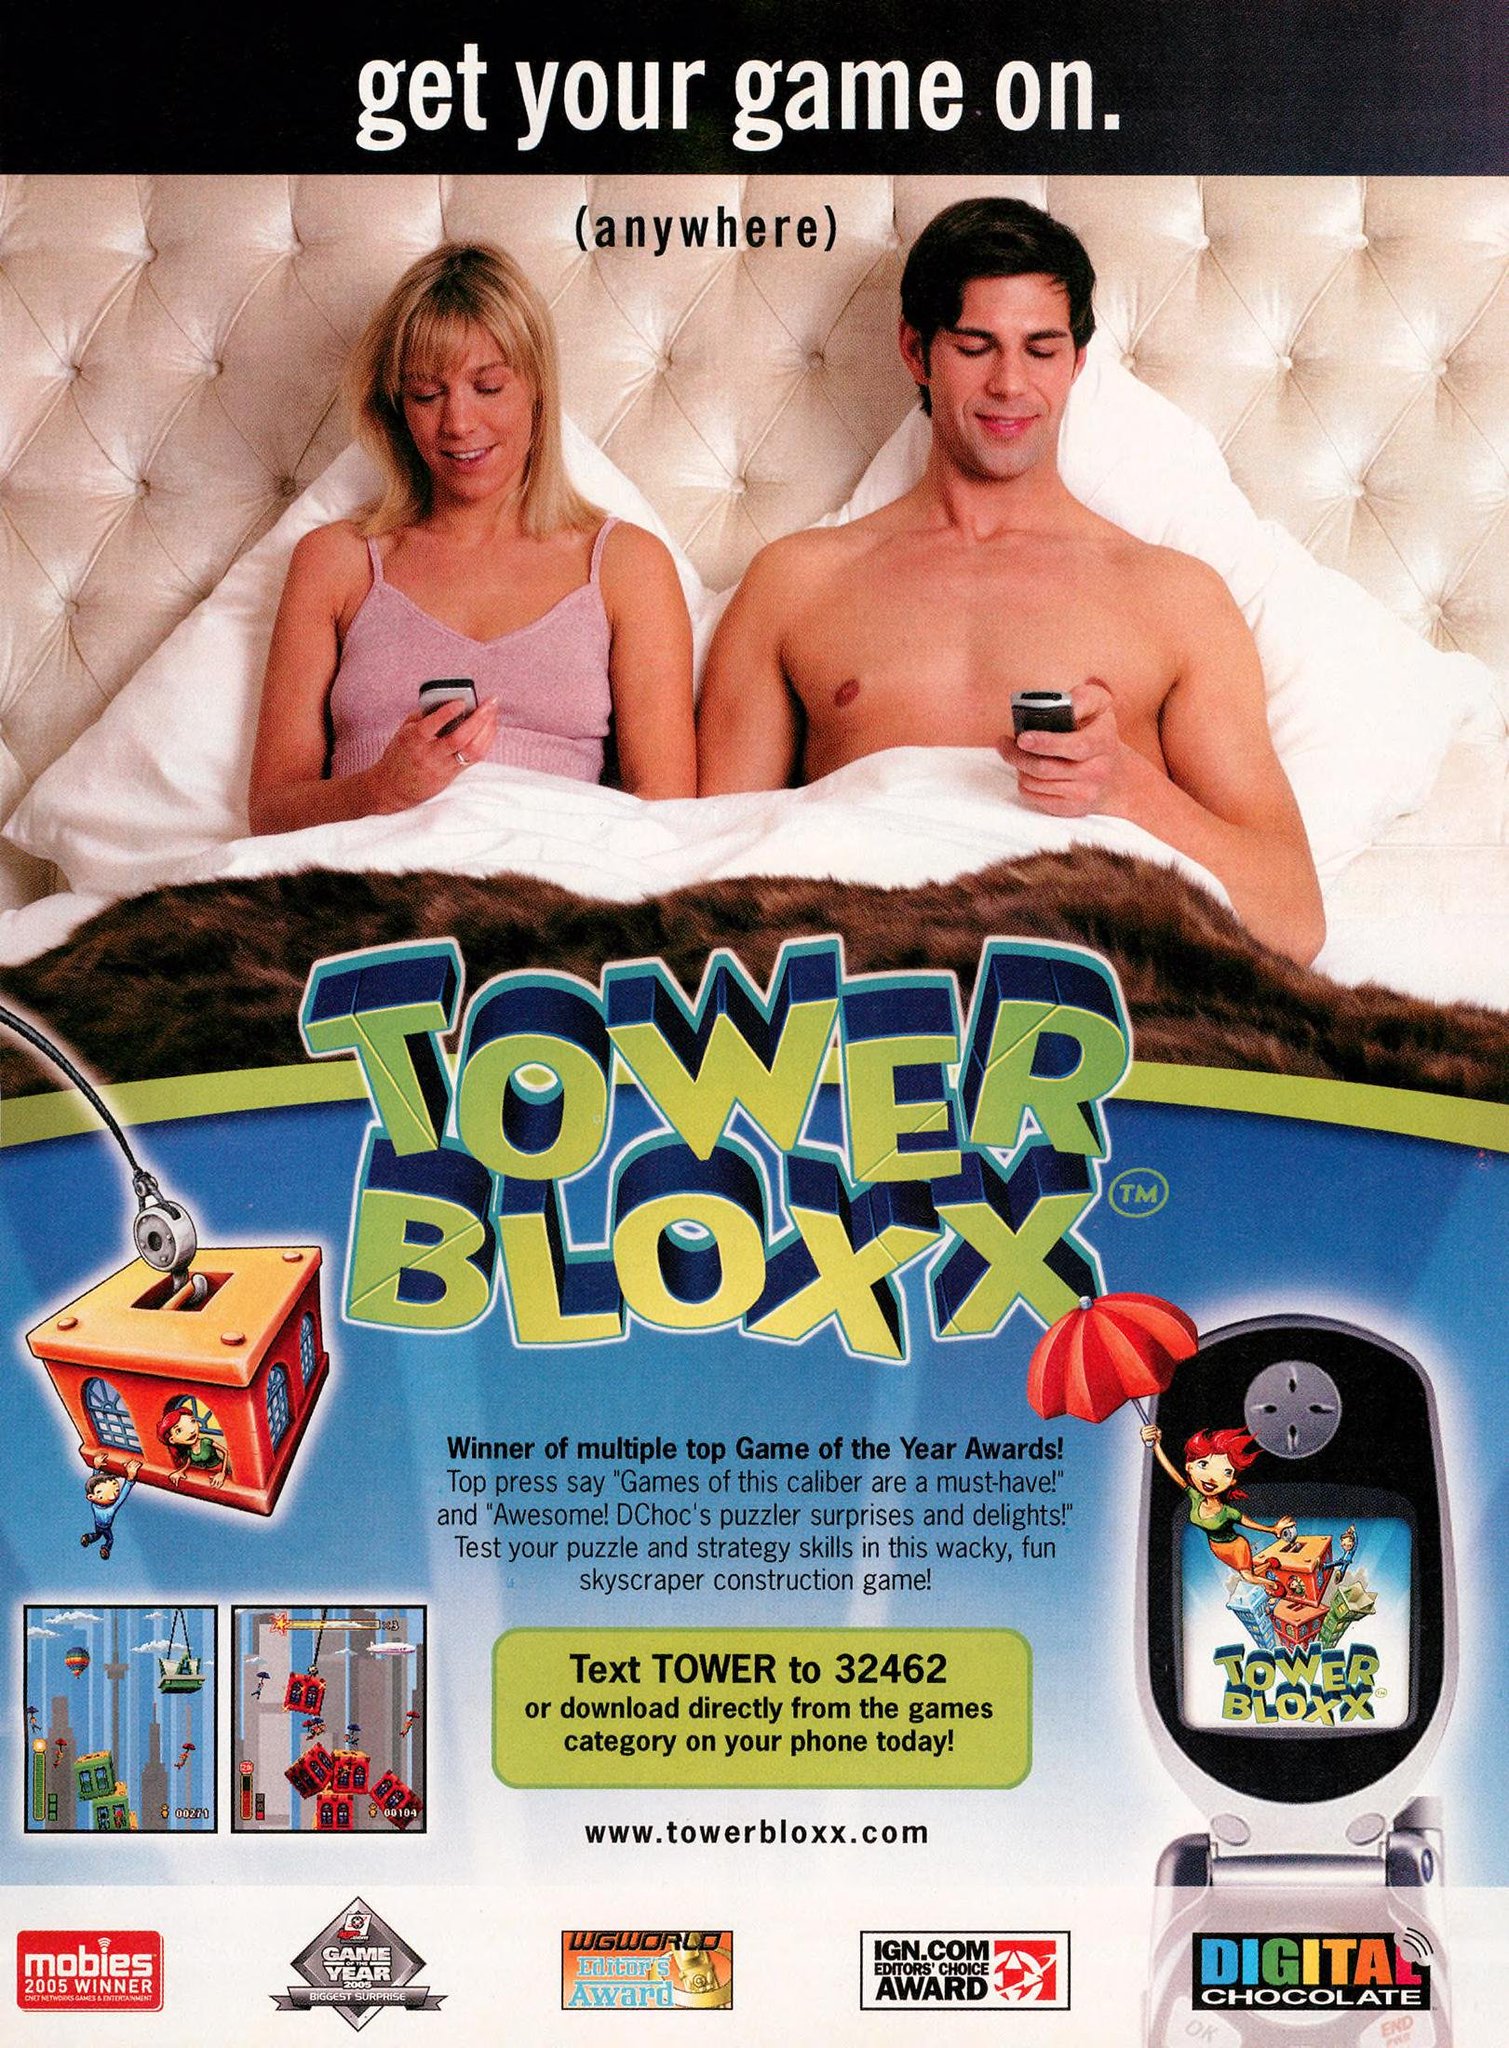 weird ass gaming ads - muscle - mobles Mecan get your game on. anywhere Tower Bloxx Game Suzan Winner of multiple top Game of the Year Awards! Top press say Games of this caber are a must! and Awesome Choc's puzzle speses and delig Test your puzzle and st